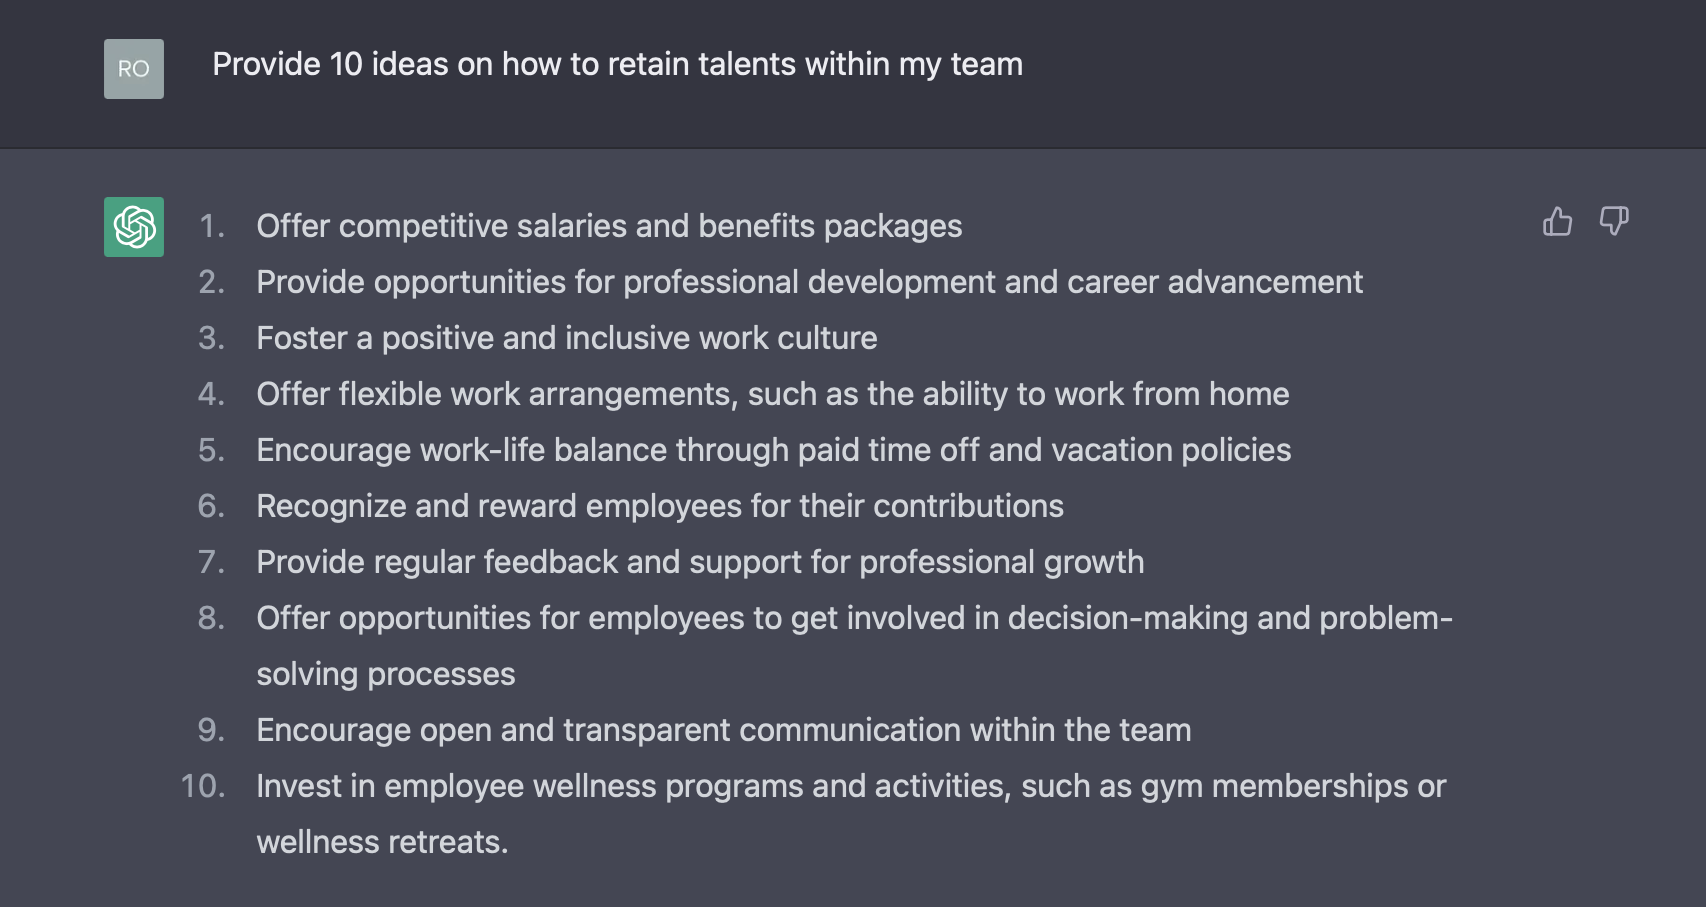 Answer provided by ChatGPT following a request for ideas to retain talents within your team